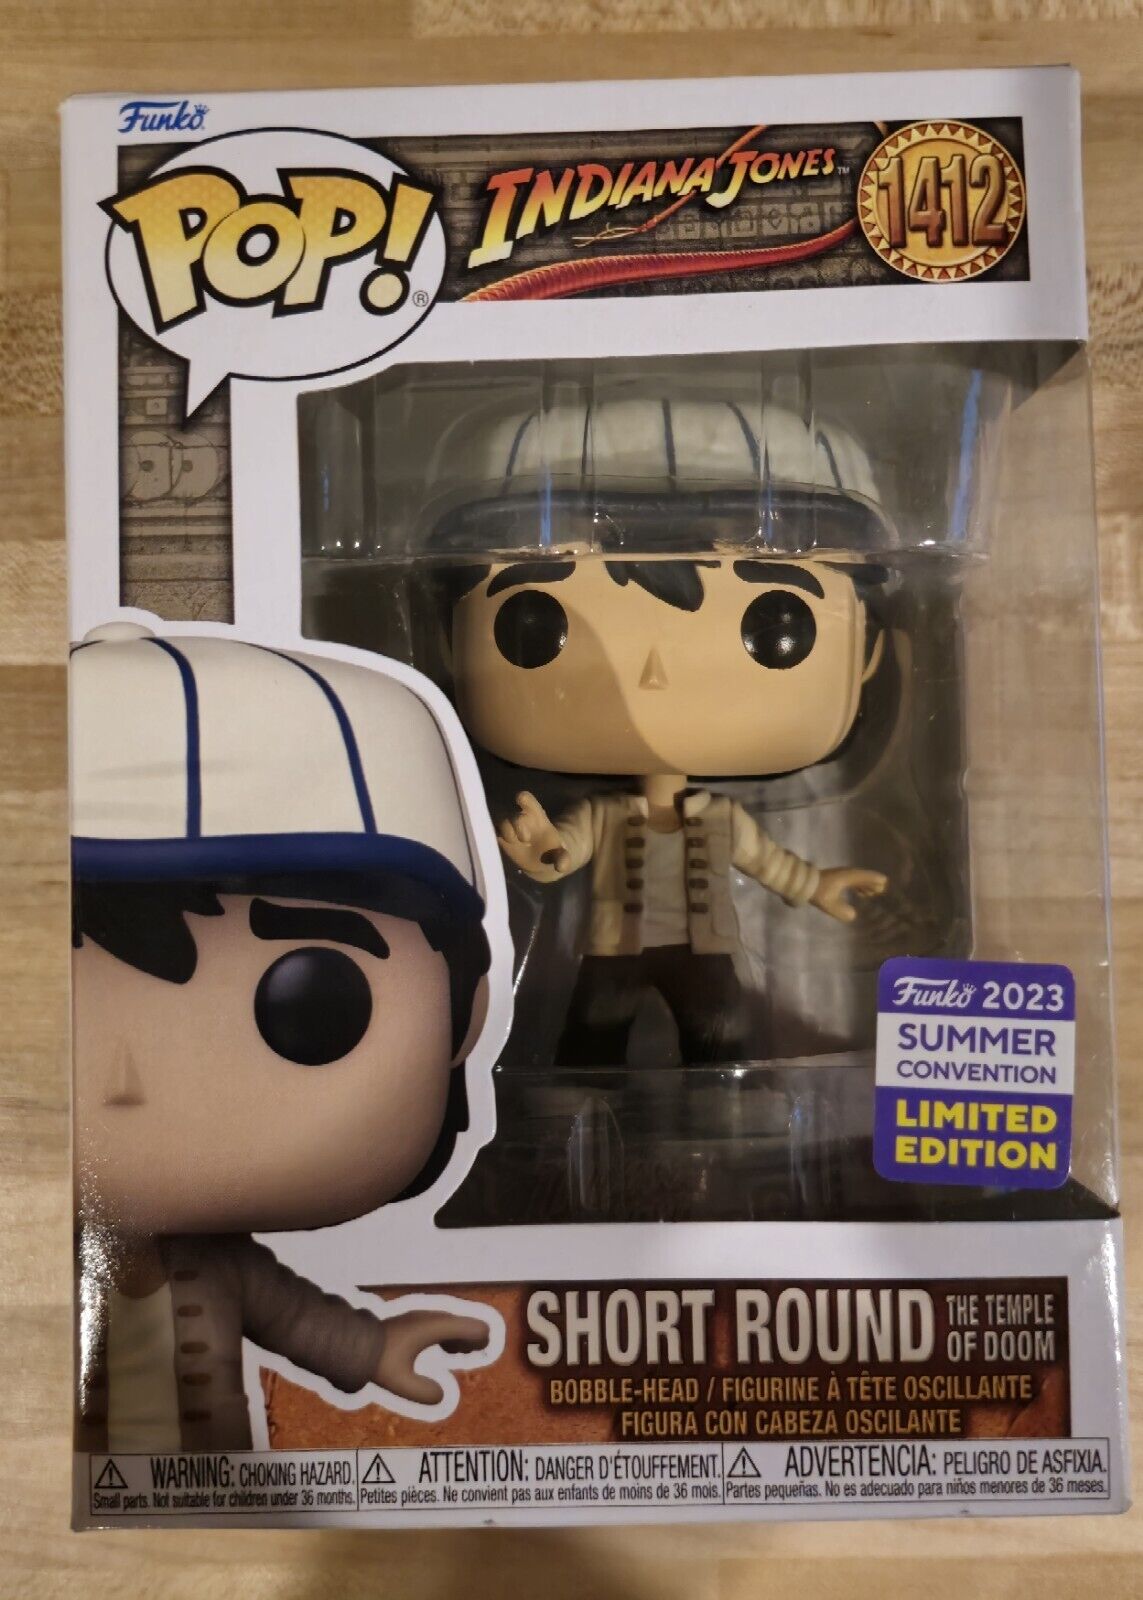 SDCC 2023 LIMITED EDITION Funko Pop EXCLUSIVE Short Round Indiana Jones #1412